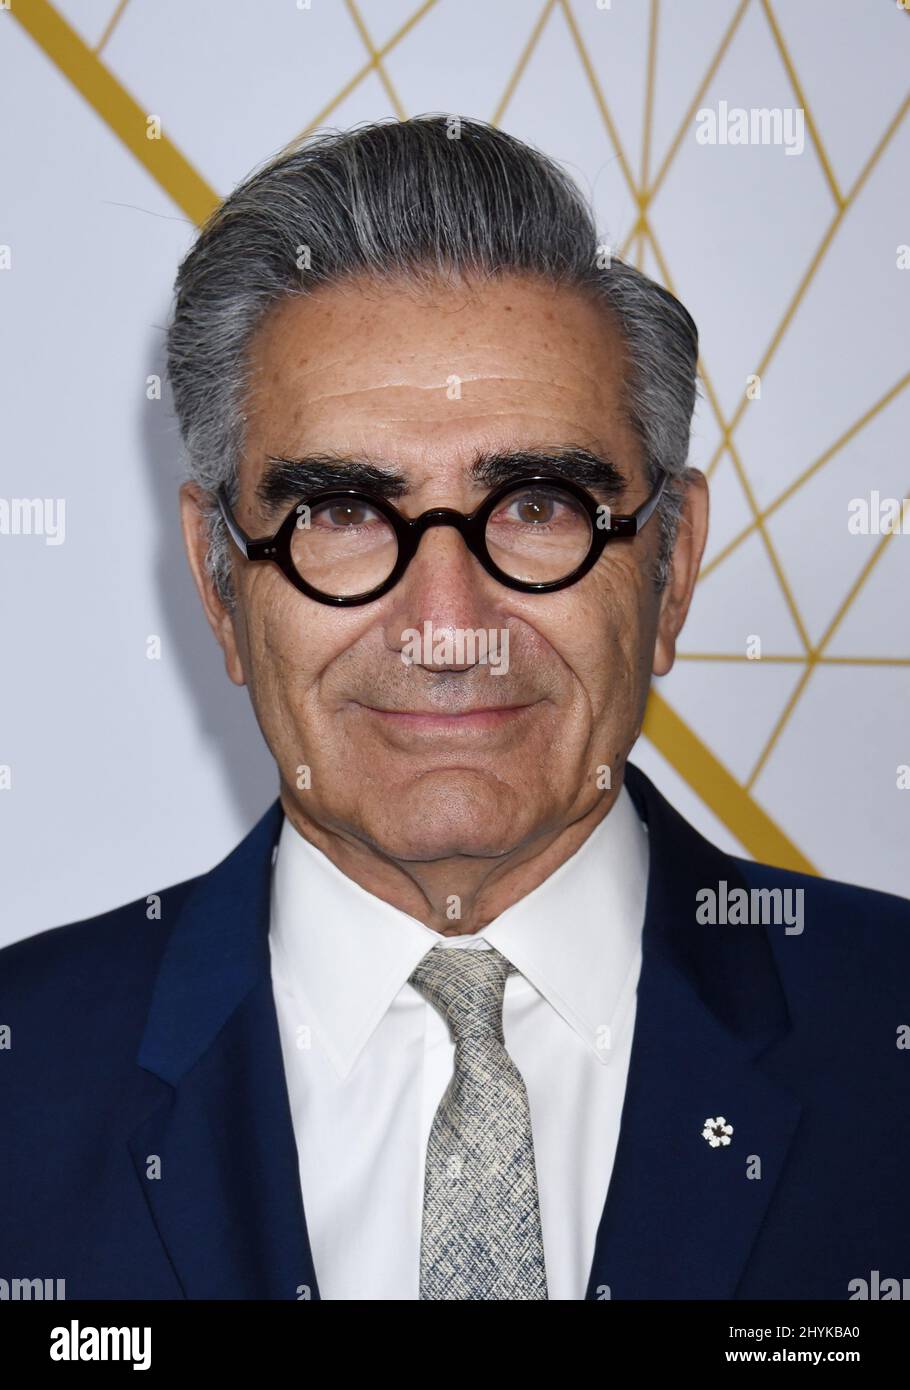 Eugene Levy at the Showtime Emmy Eve Celebration held at the San Vicente Bungalows on September 21, 2019 in West Hollywood, CA. Stock Photo